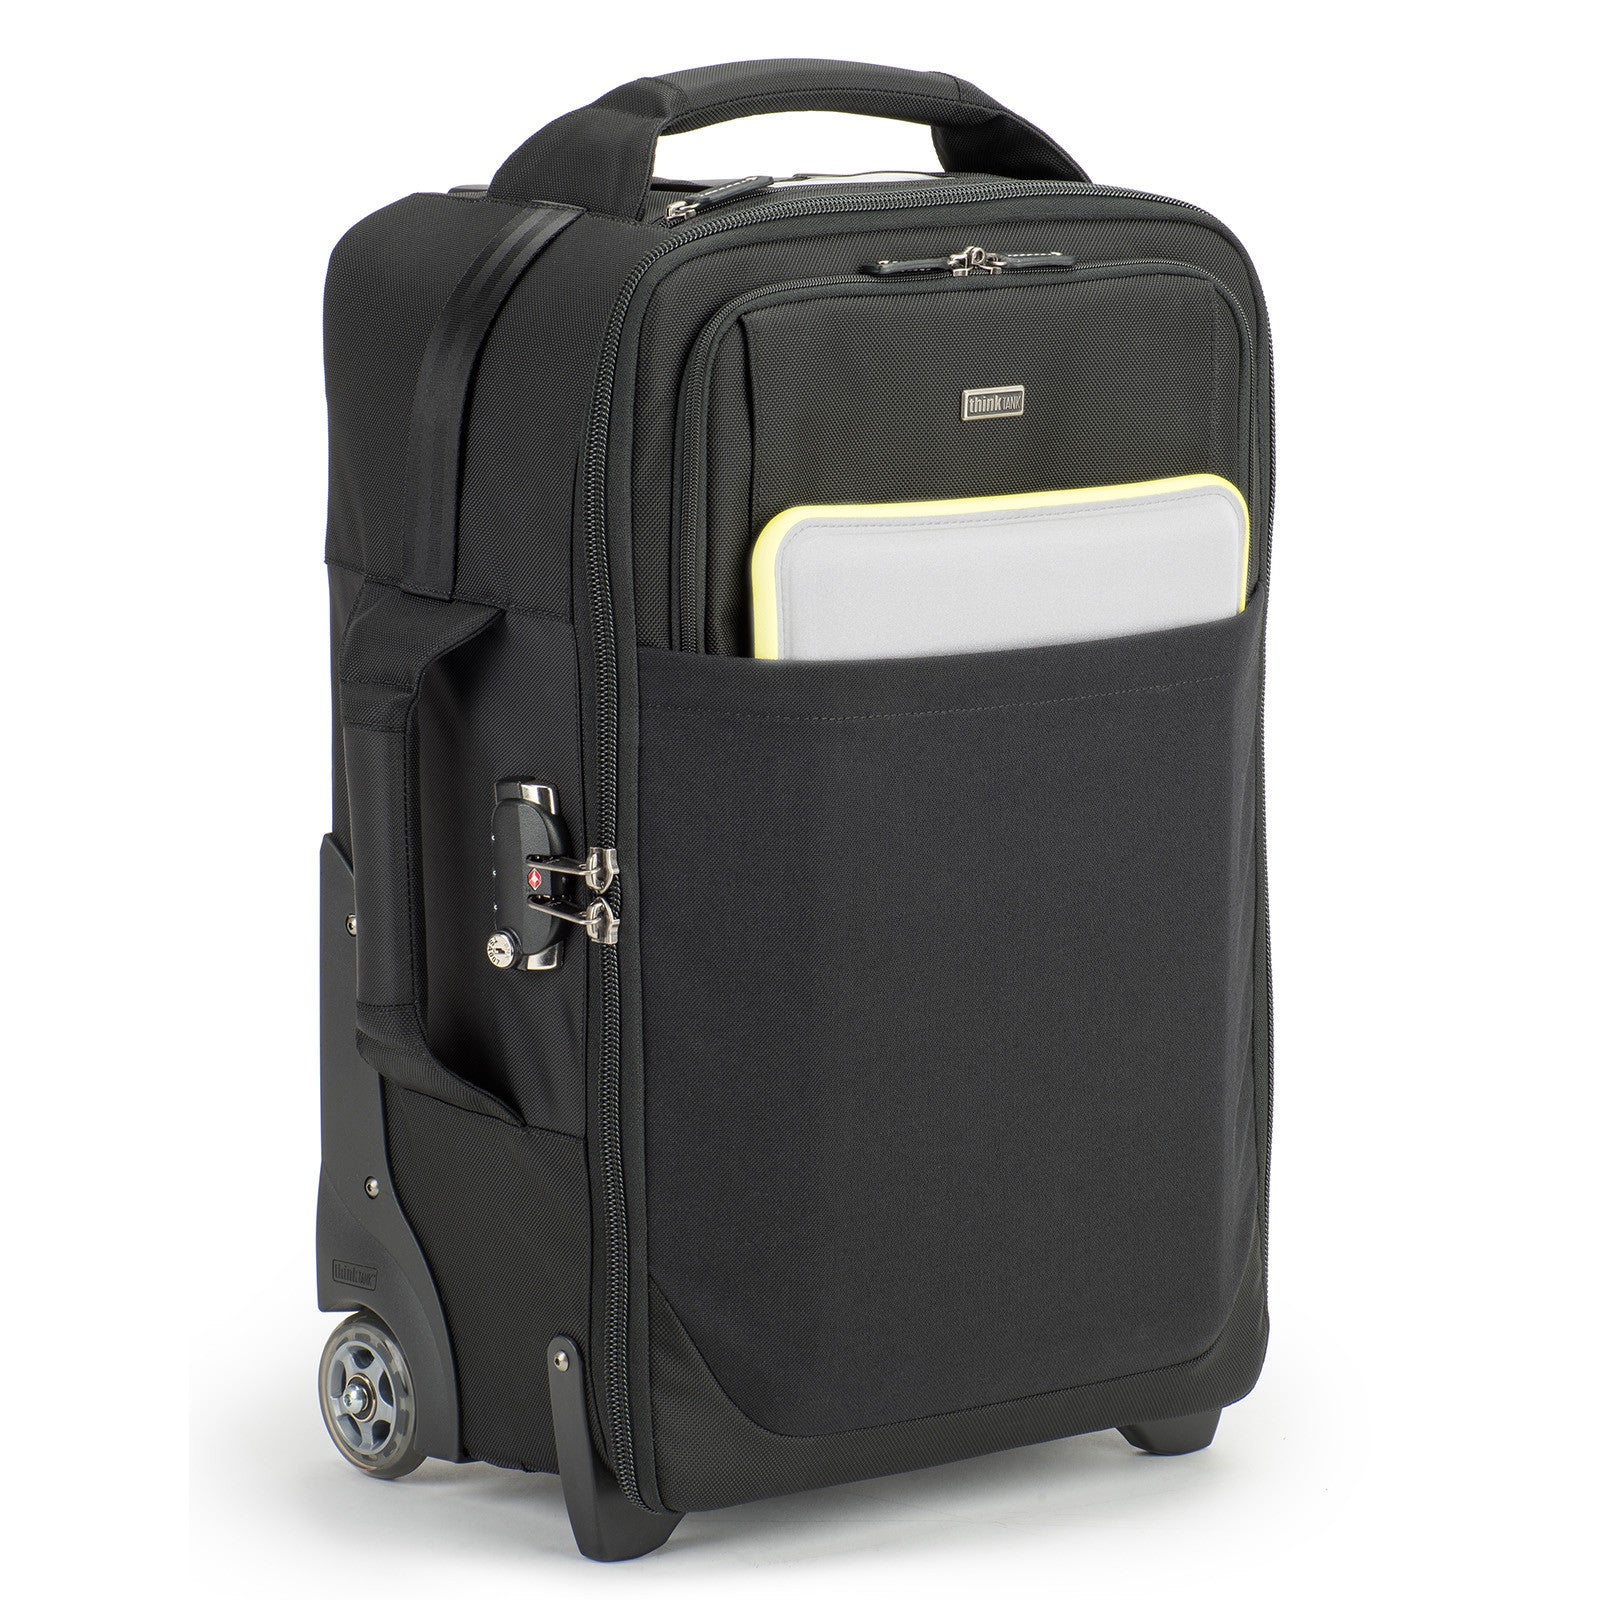 Think Tank Airport Security V3.0 Rolling Camera Bag, bags roller bags, Think Tank Photo - Pictureline  - 1